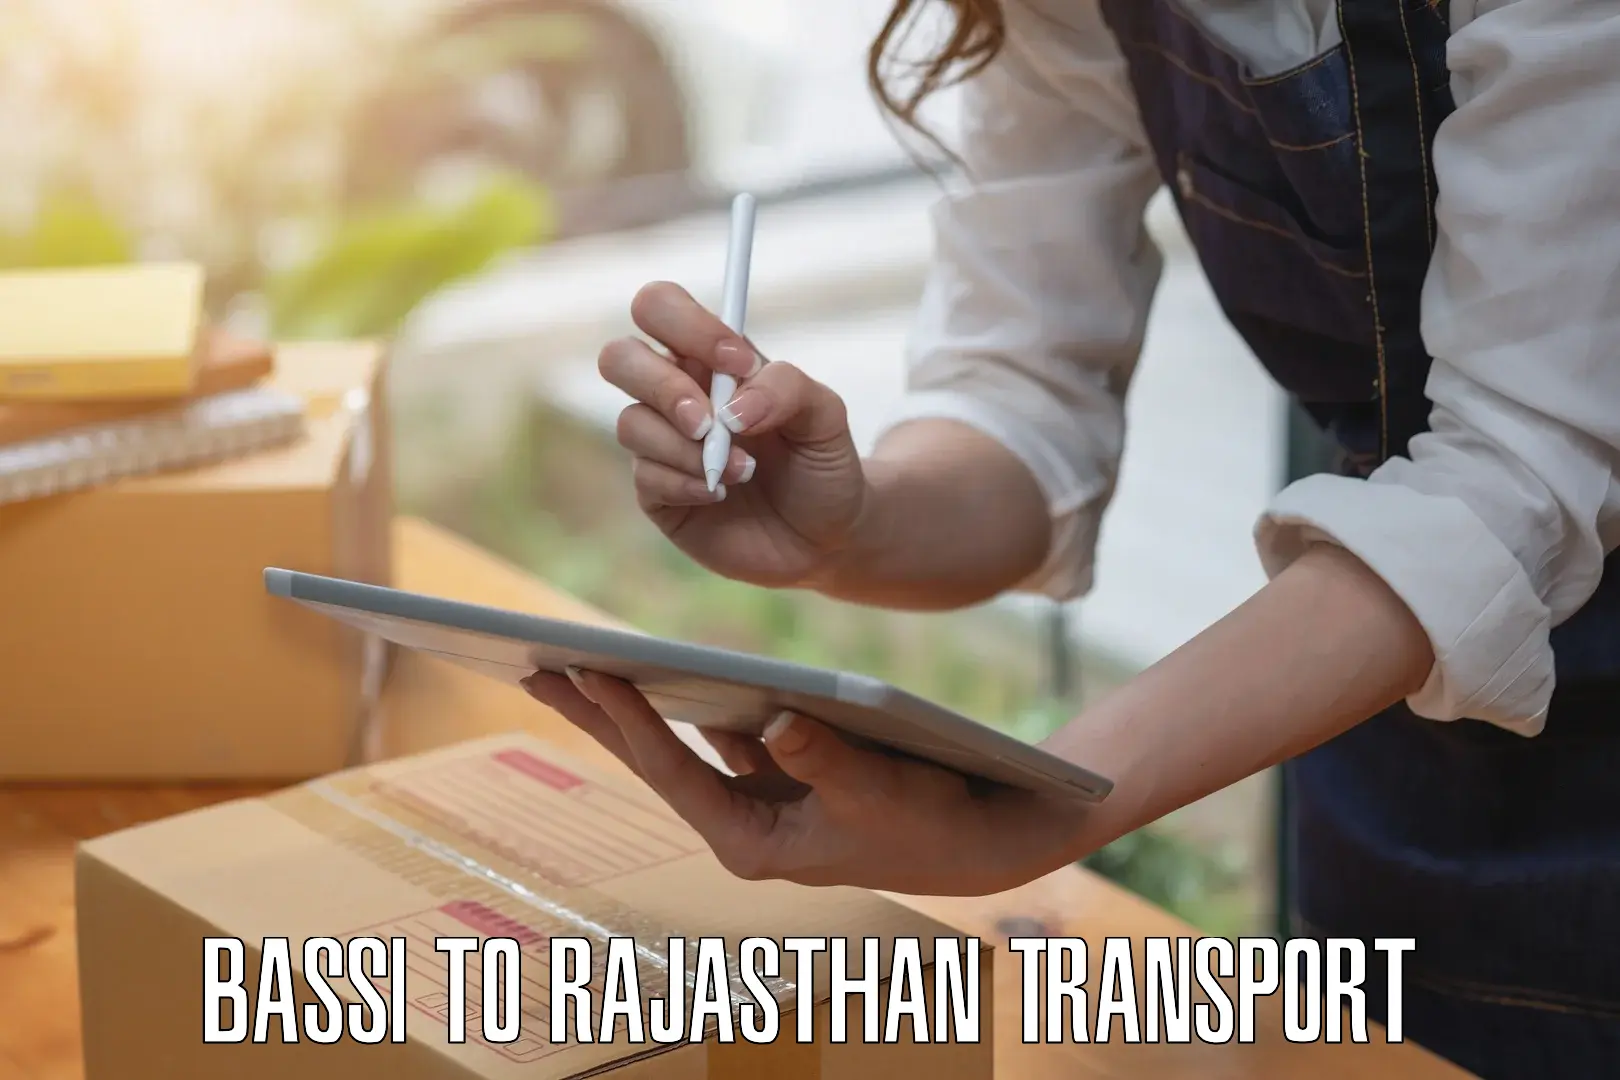 Vehicle transport services Bassi to Bassi